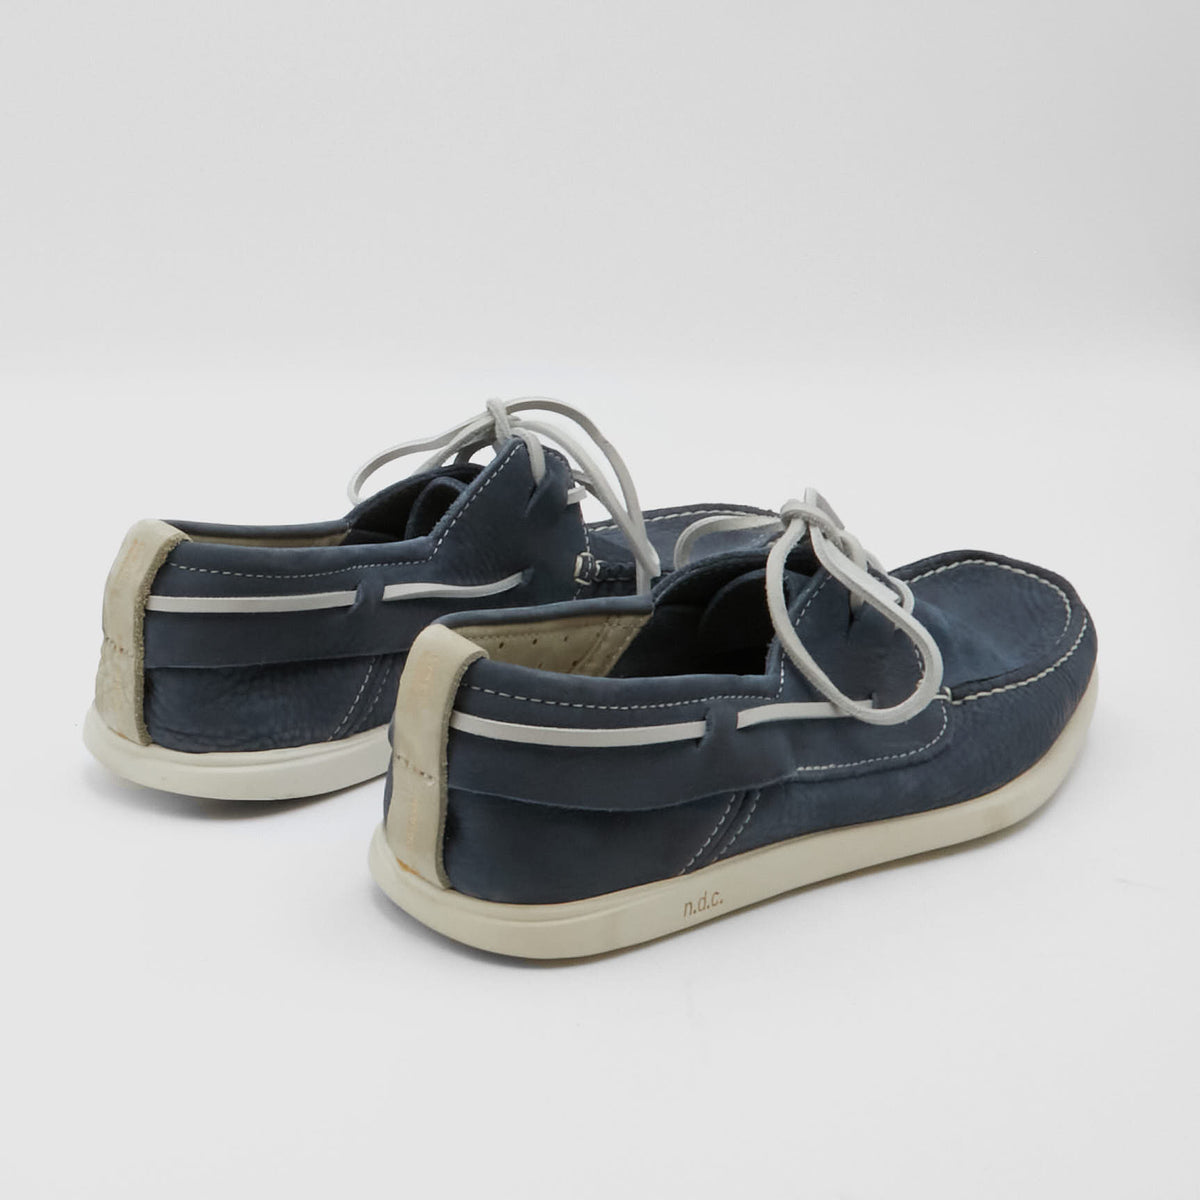 n.d.c. made by hand Alithia Vintage Wash Boat Shoes